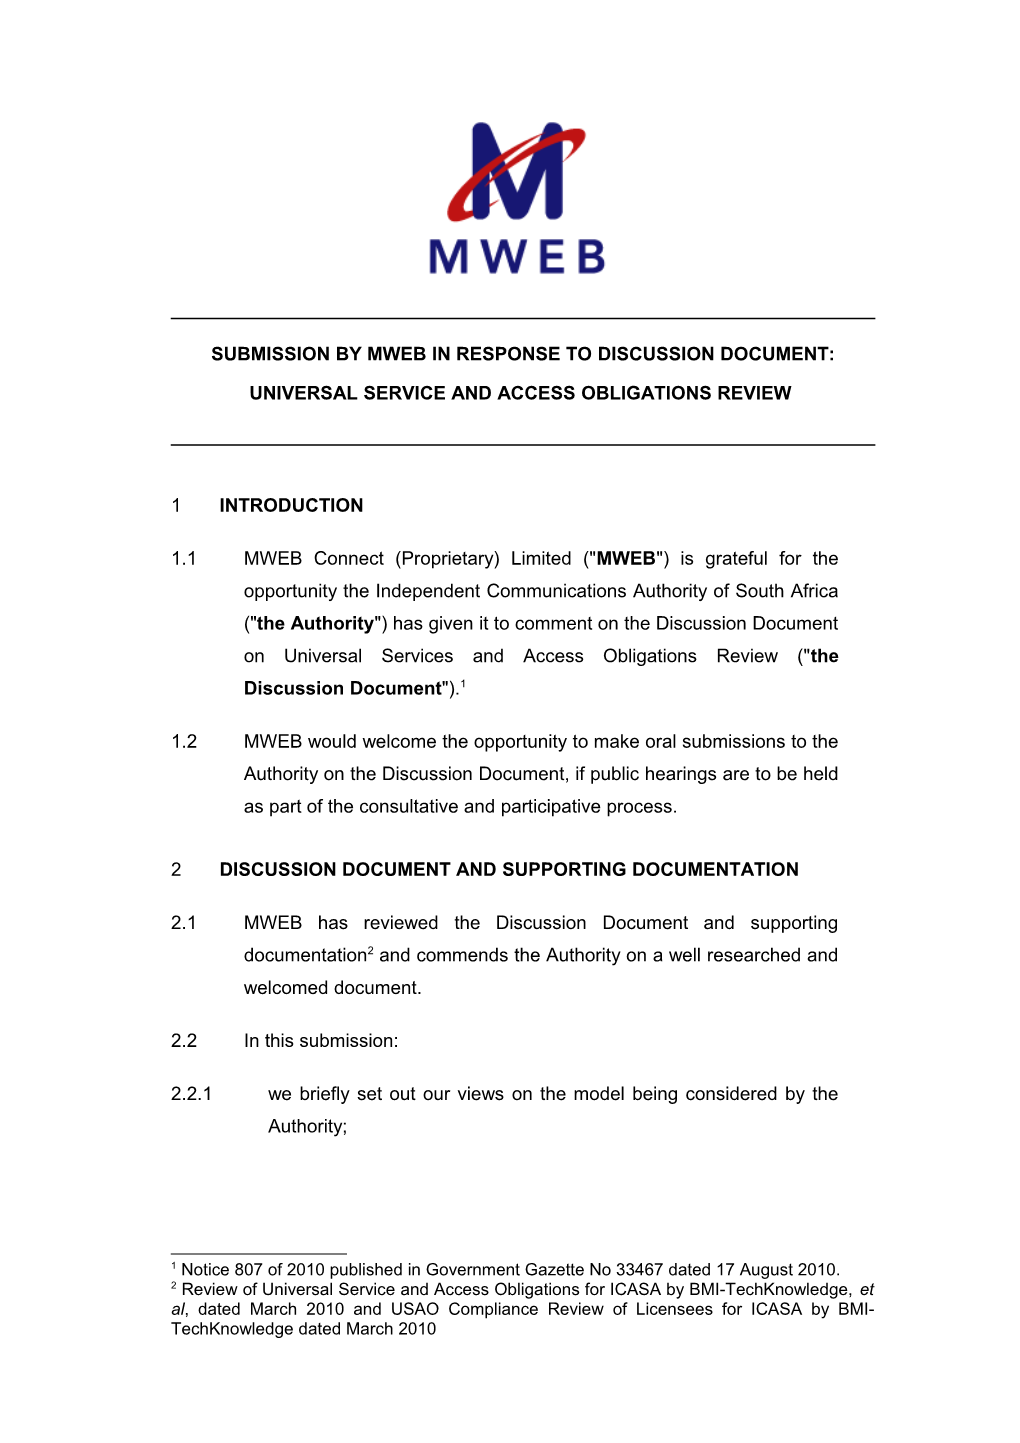 Submission by Mweb in Response to Discussion Document: Universal Service and Access Obligations